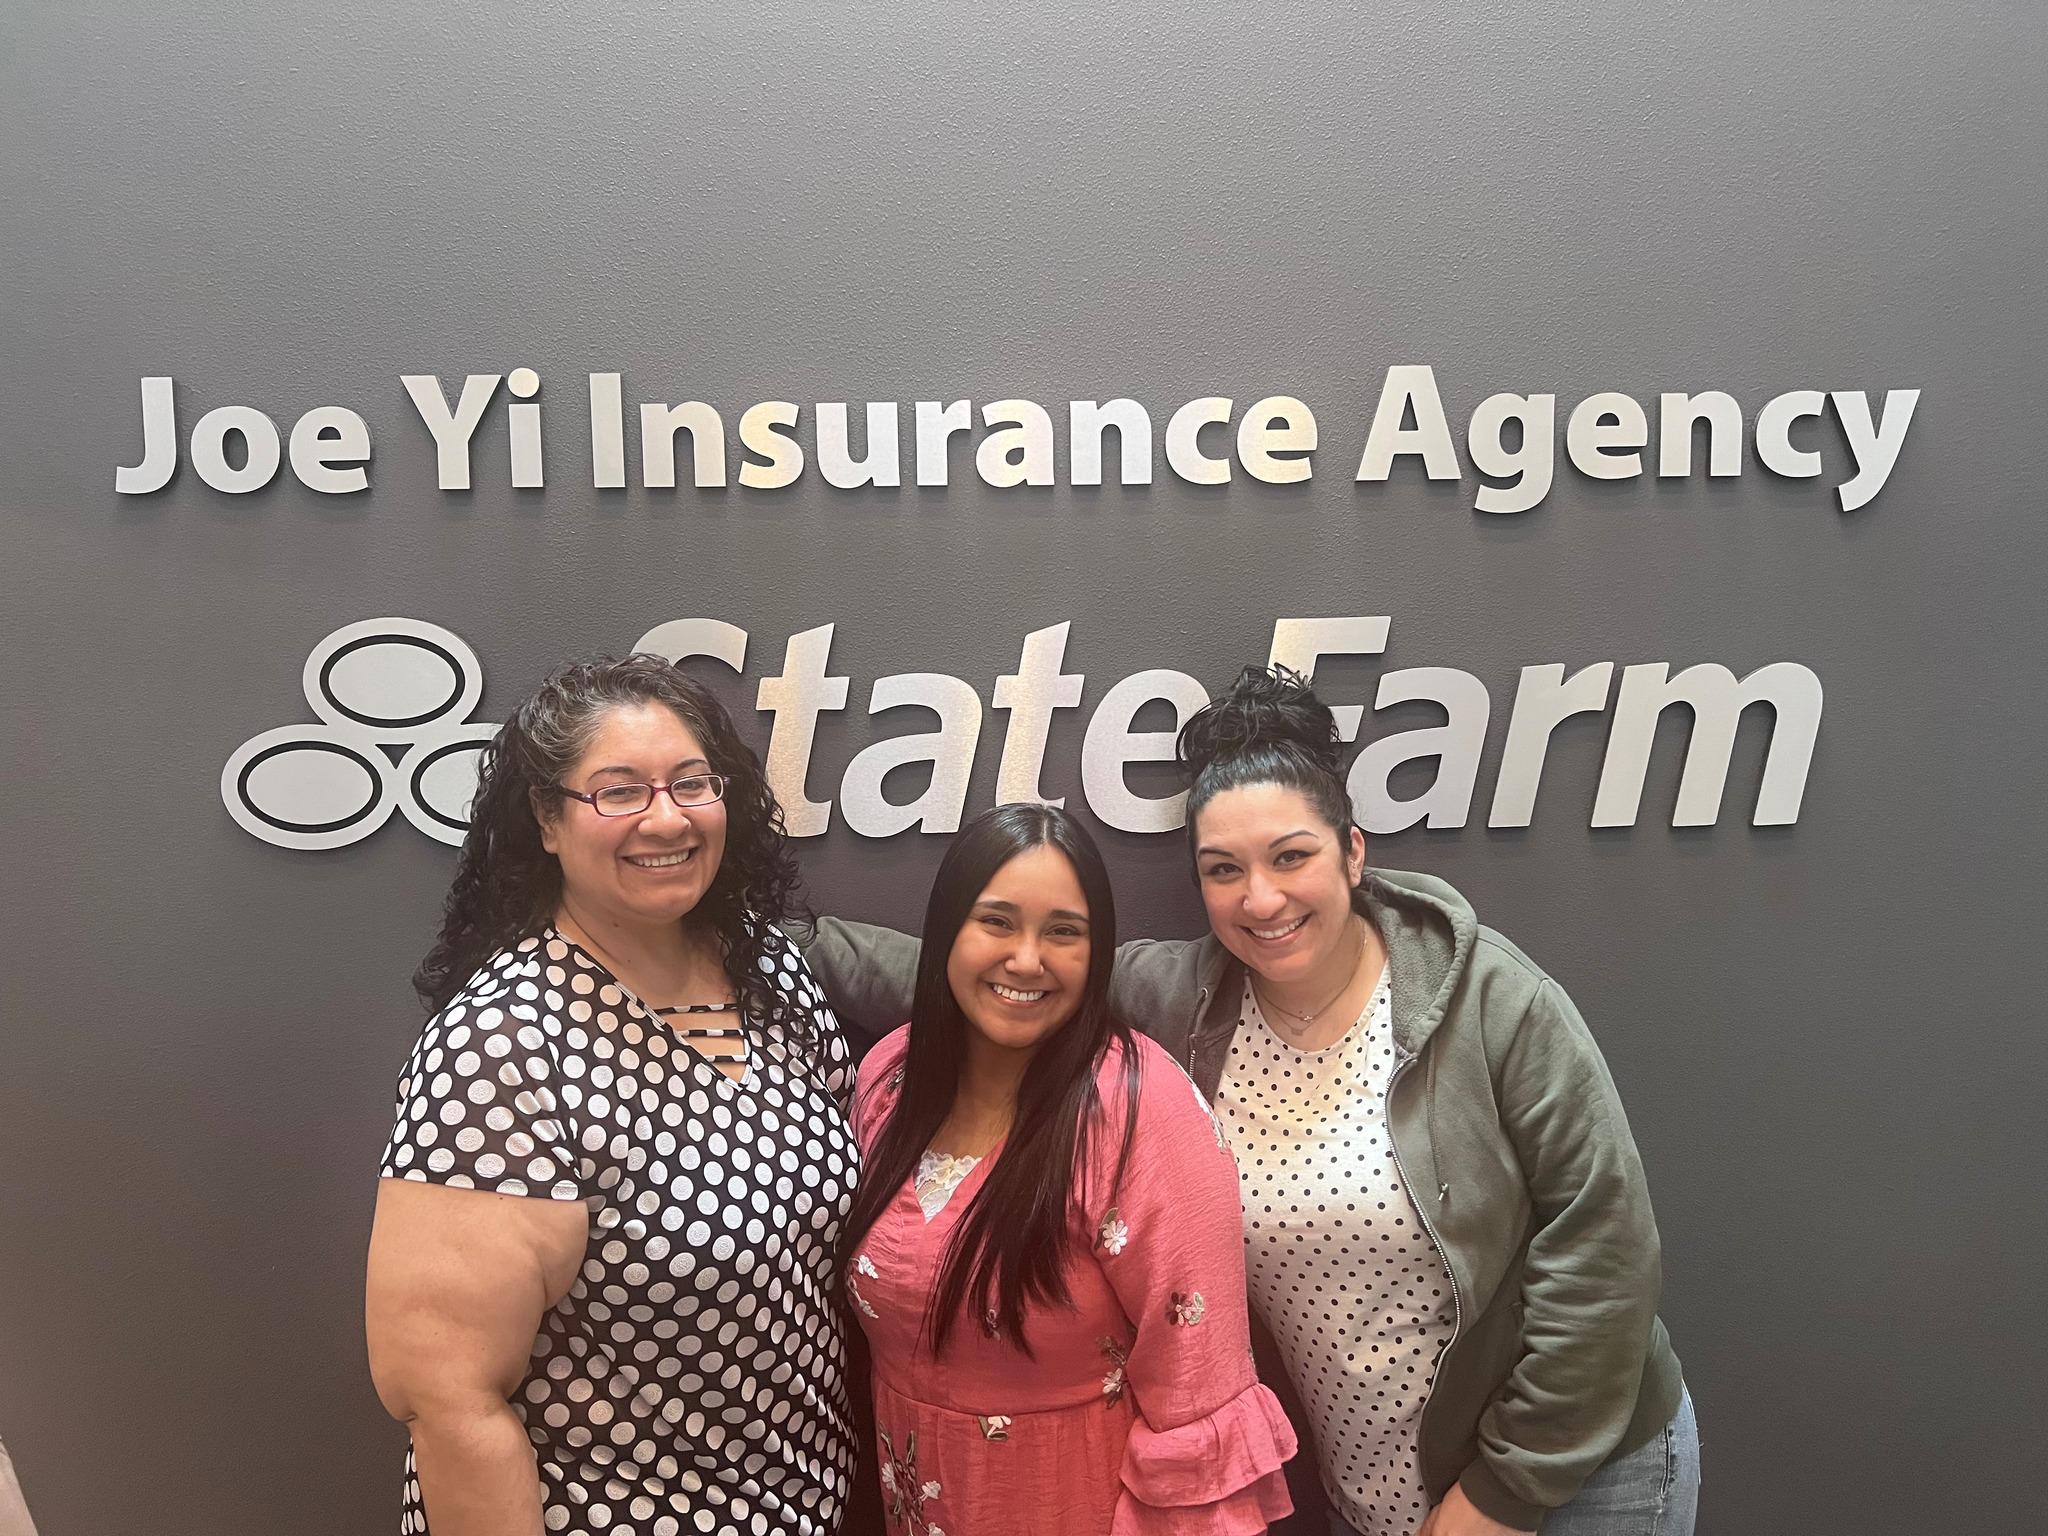 I want to give such an amazing thanks to my amazing, resilient, and hardworking service team over here at Joe Yi State Farm. Thank you for all you do for our office!